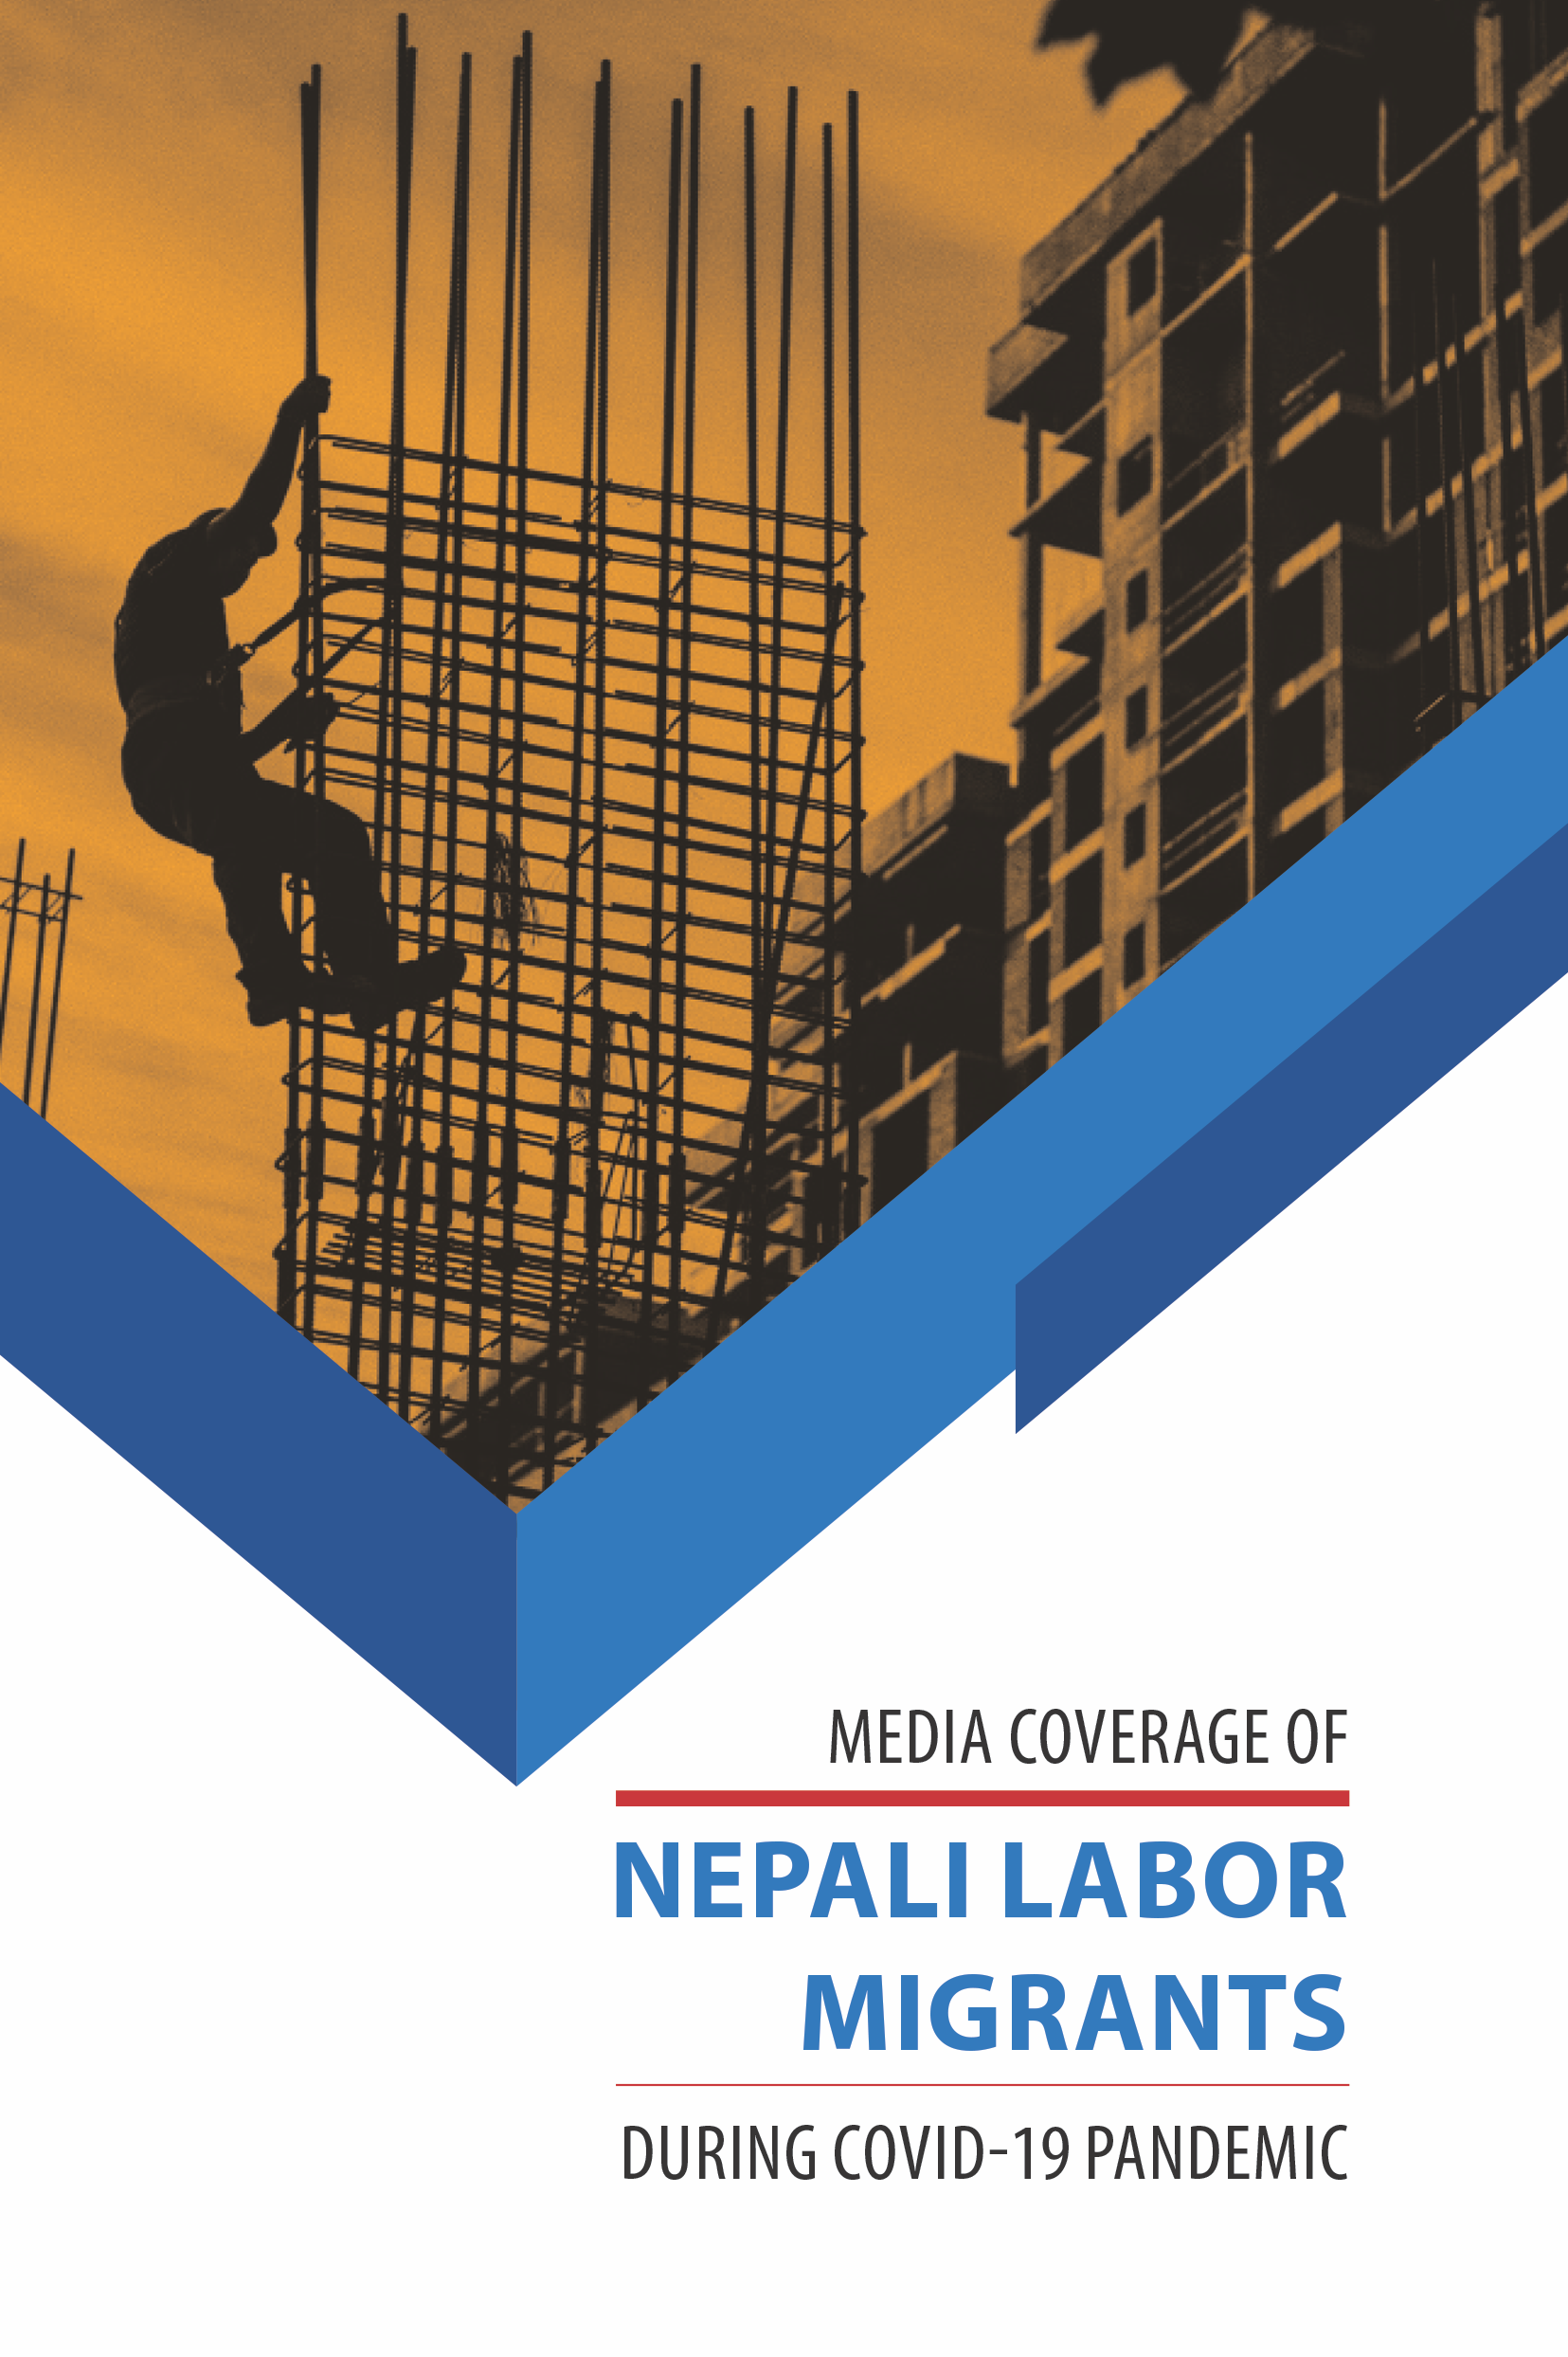 Media Coverage of Nepali Labor Migrants During Covid-19 Pandemic